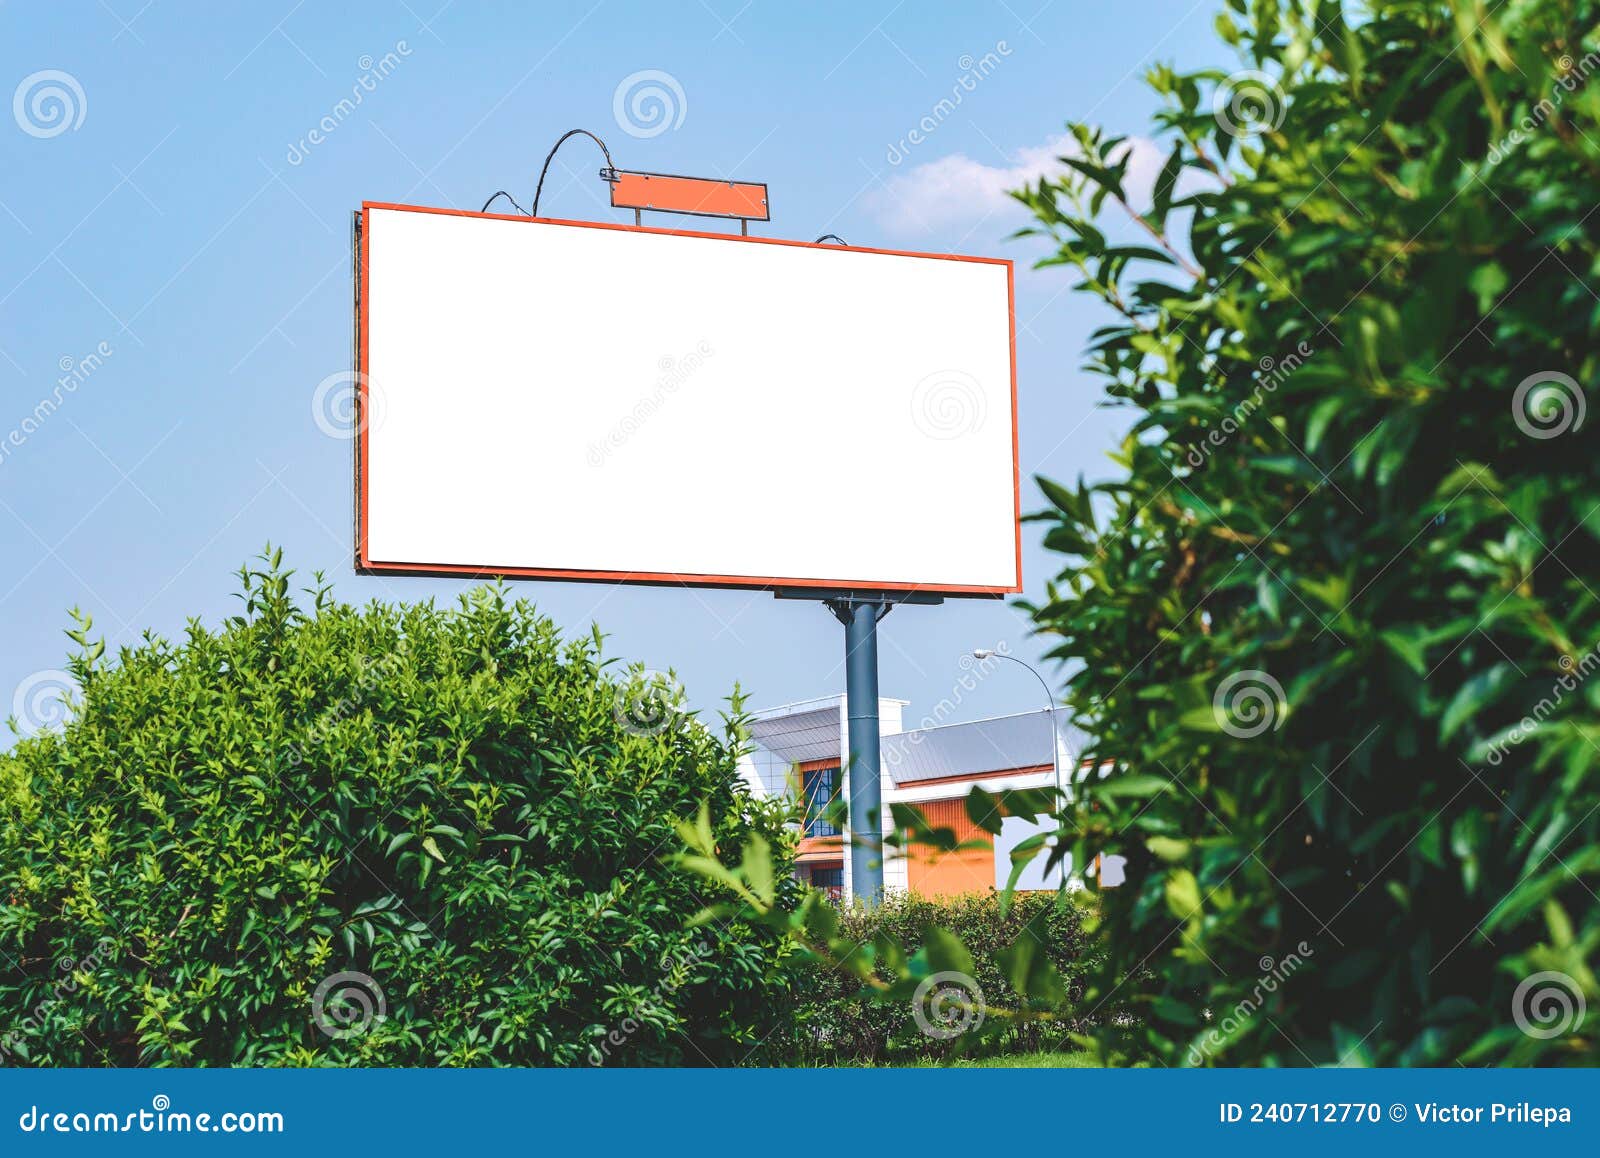 Billboard Mockup. Against the Backdrop of the City Stock Photo - Image ...